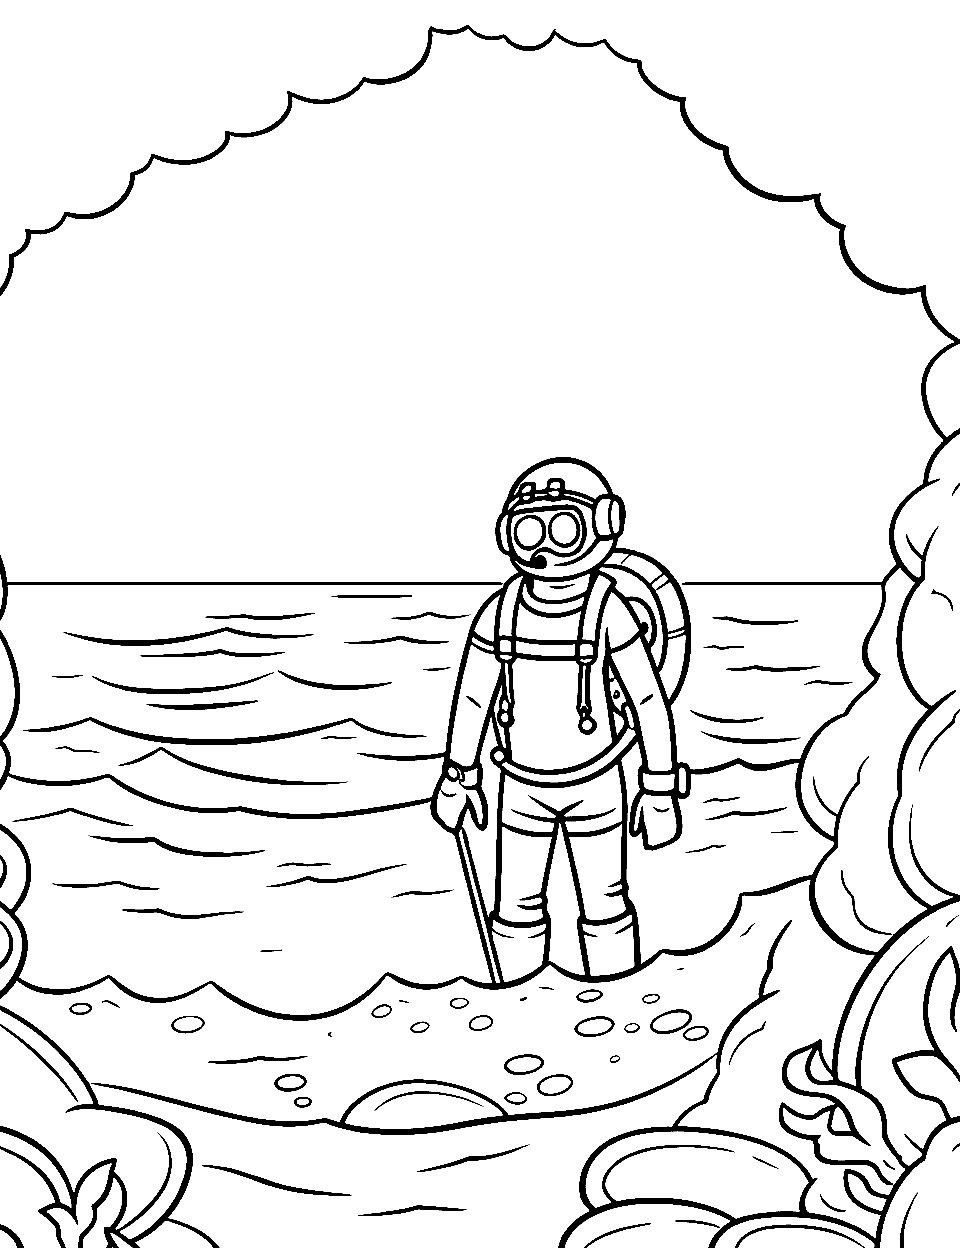 Scuba Diver Coloring Page - A diver calmly coming out of the sea, heading for a cave to change.